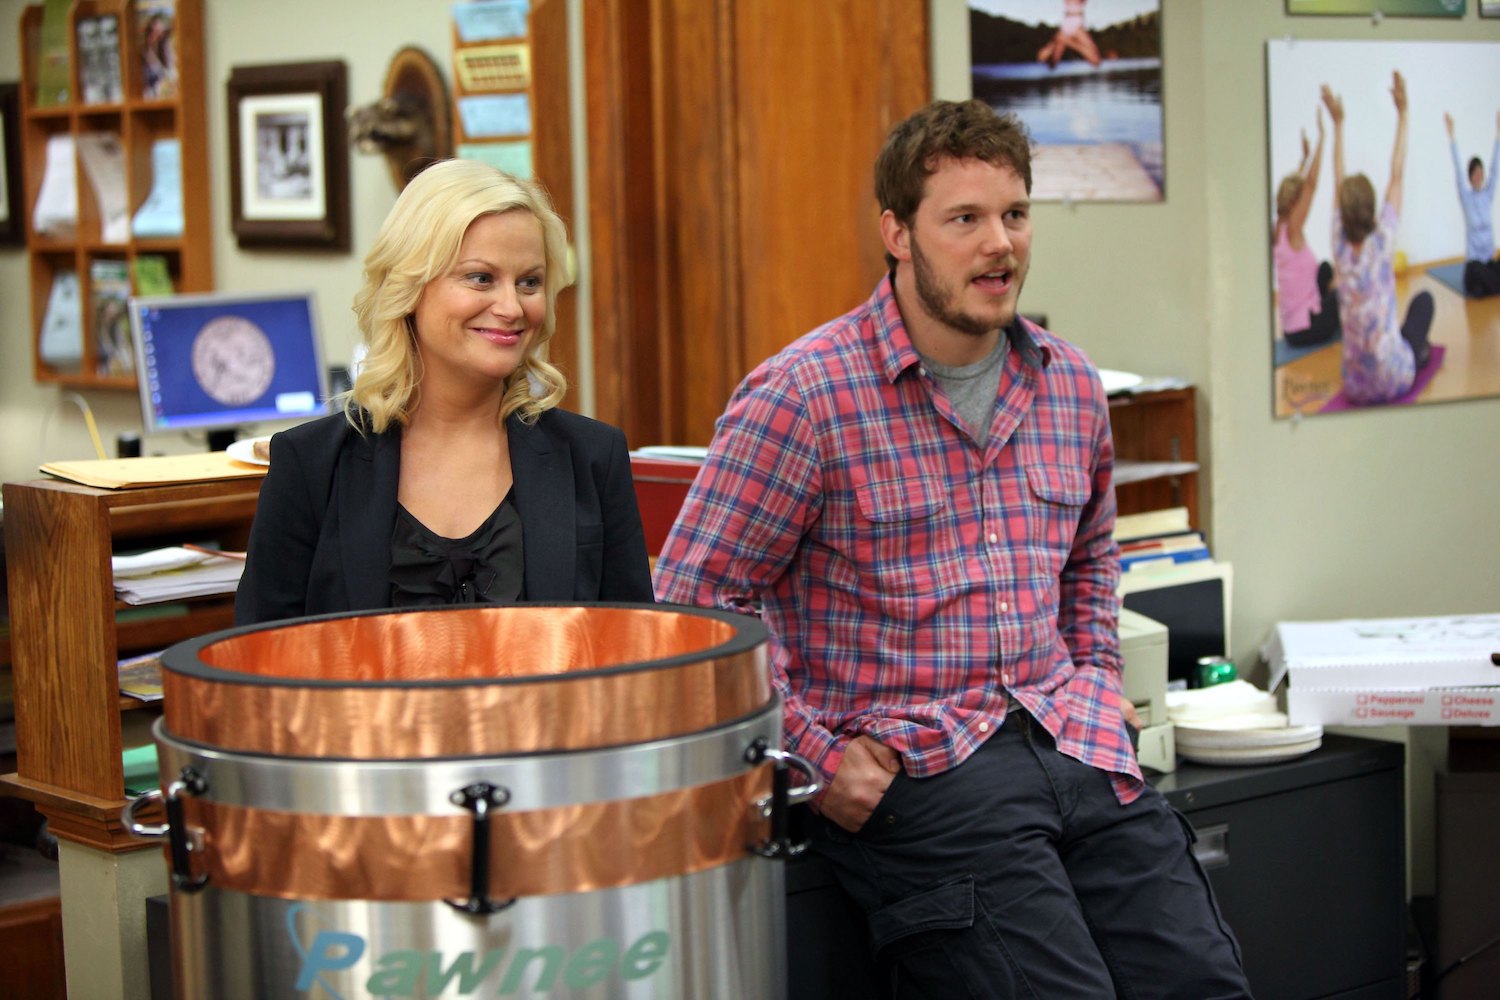 Amy Poehler as Leslie Knope and Chris Pratt as Andy Dwyer on 'Parks and Recreation'